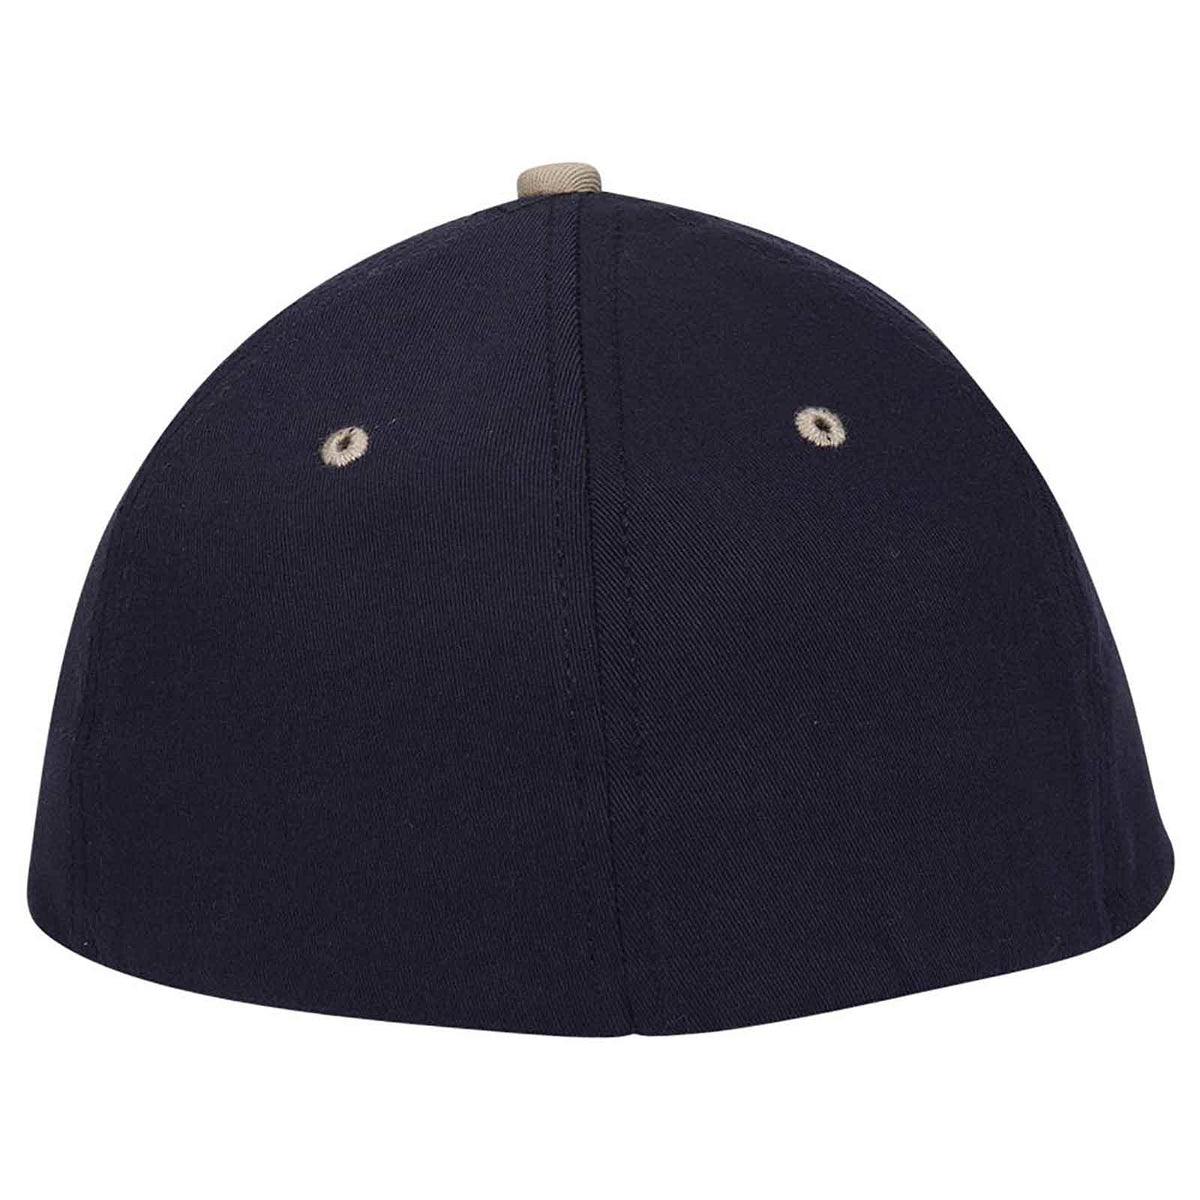 OTTO 12-267 Stretchable Deluxe Brushed Cotton Twill Sandwich Visor Low Profile Pro Style Cap S/M - Navy Navy Khaki - HIT a Double - 2